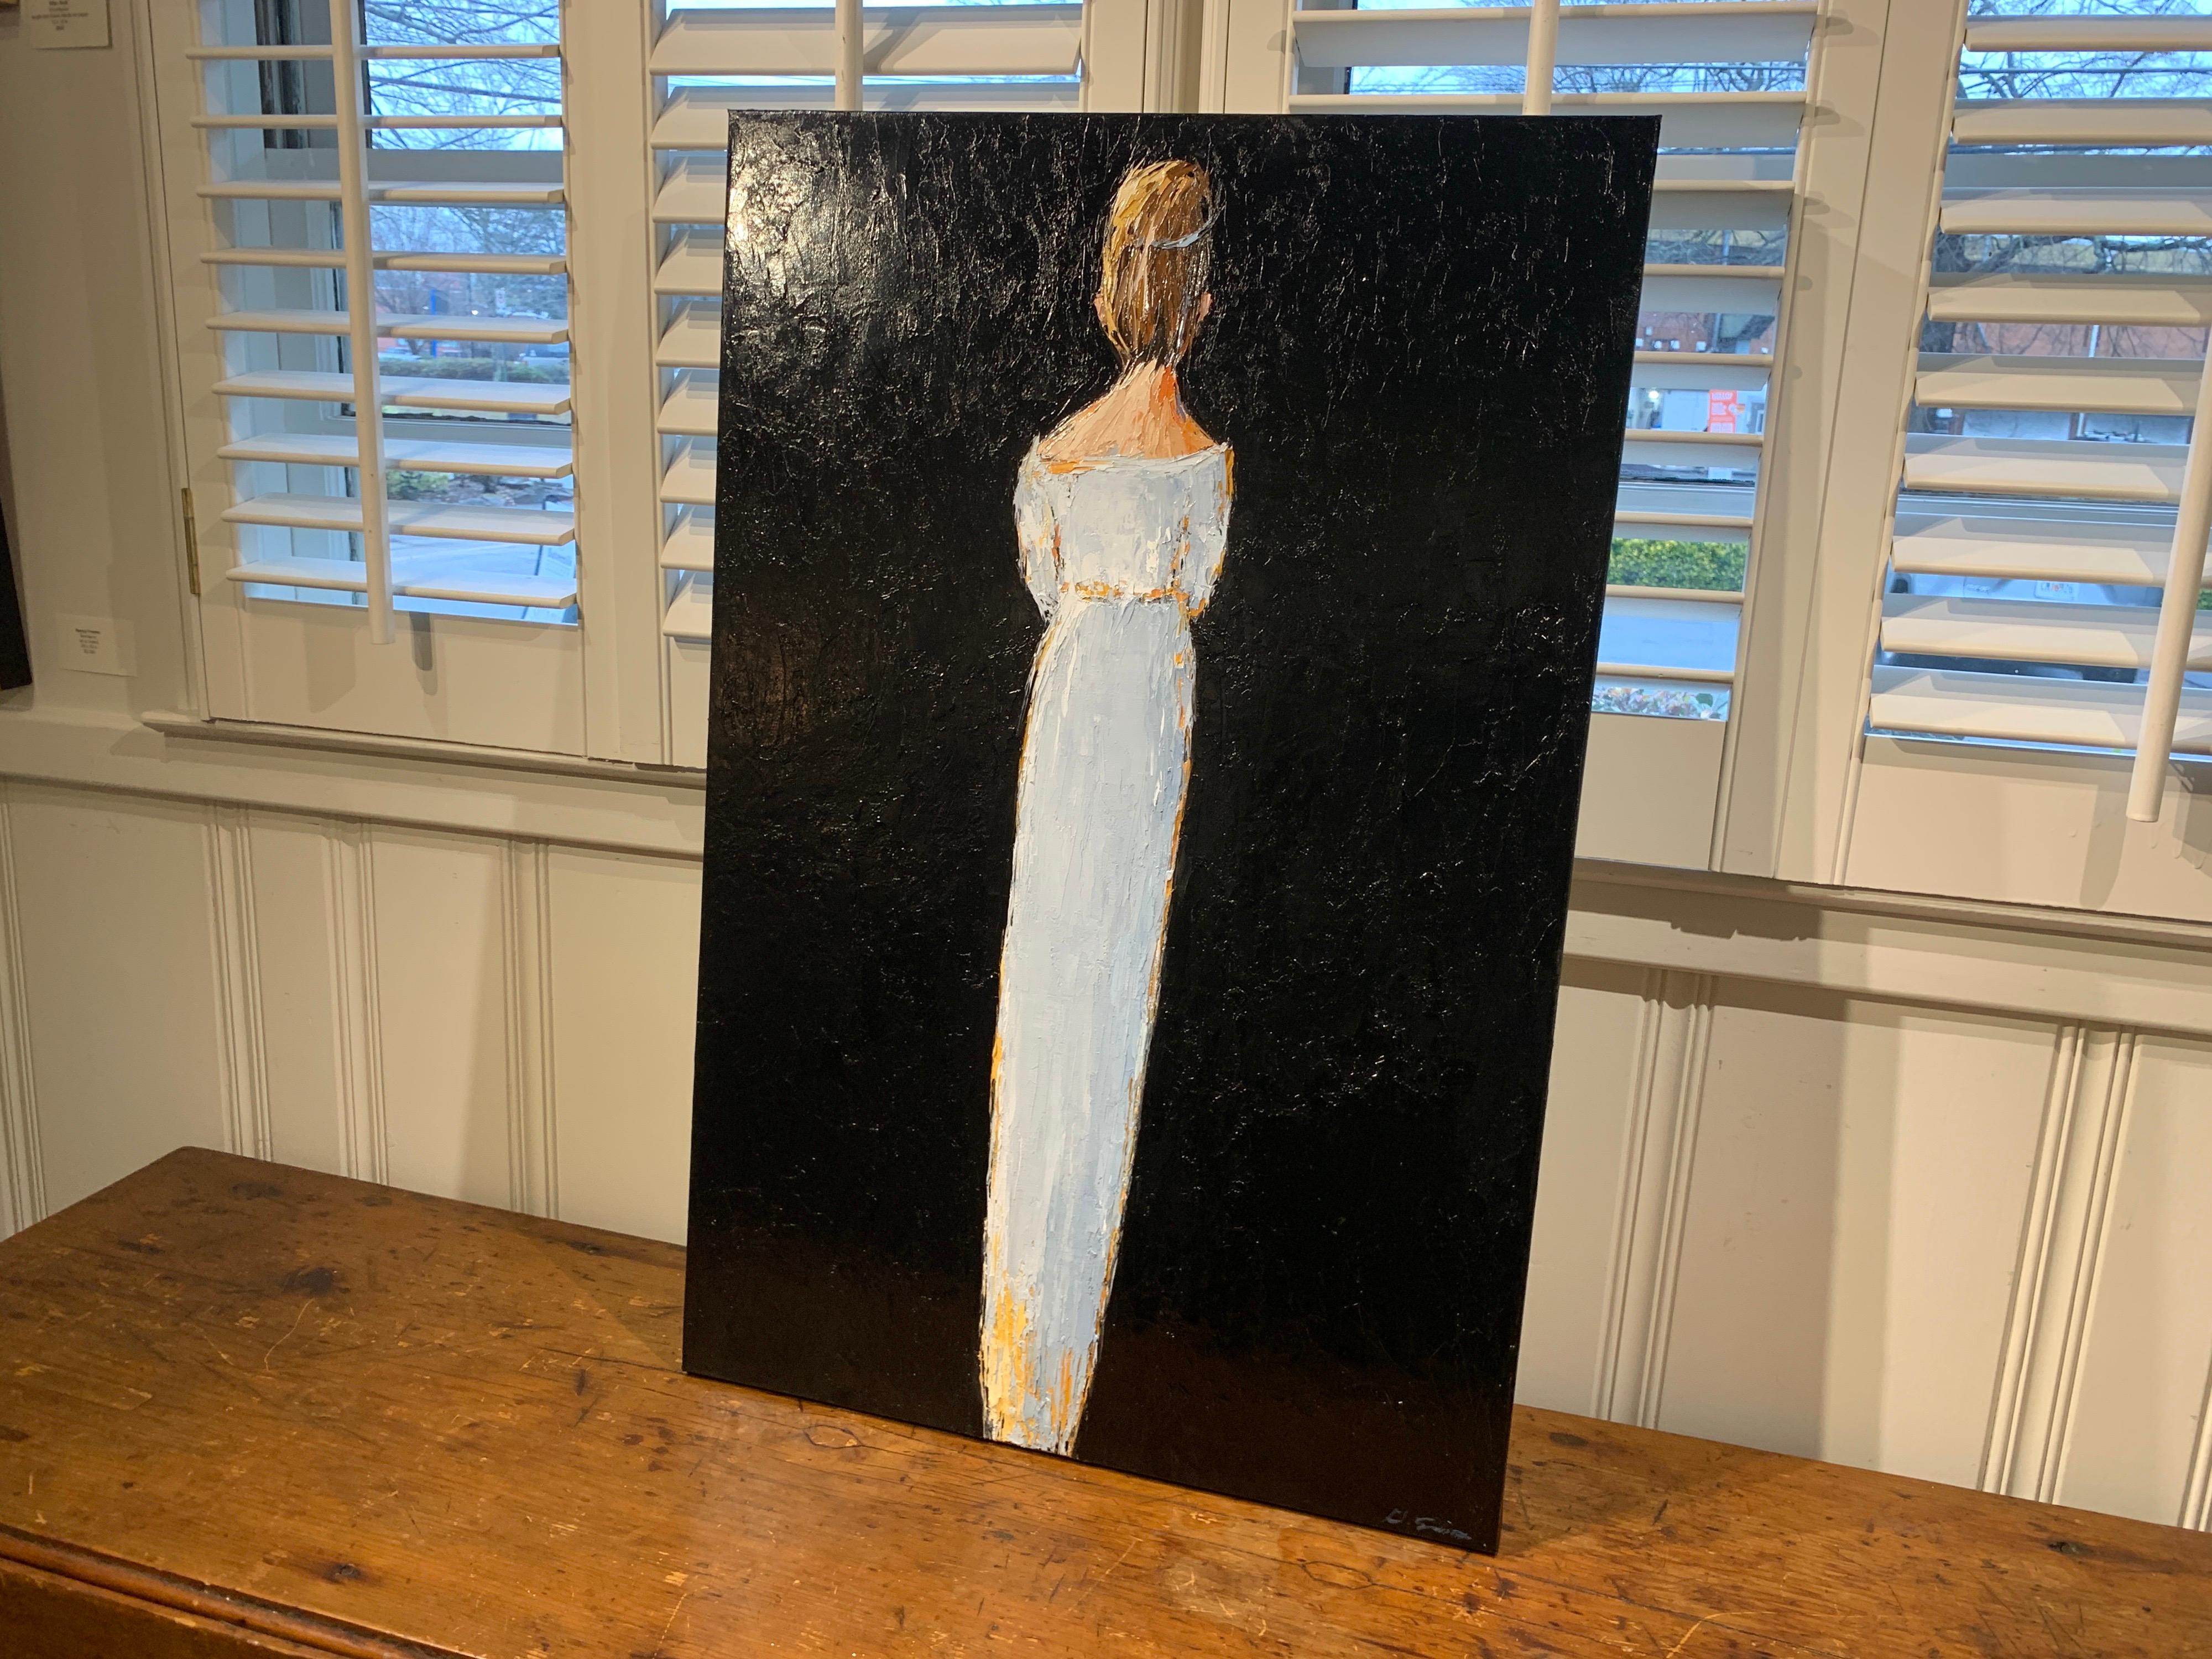 'Victoria' is a framed Impressionist figurative oil on canvas painting of vertical format, created by American artist Geri Eubanks in 2021. Featuring a palette made of blue, white, soft grey, black and orange tones, the painting depicts an elegant